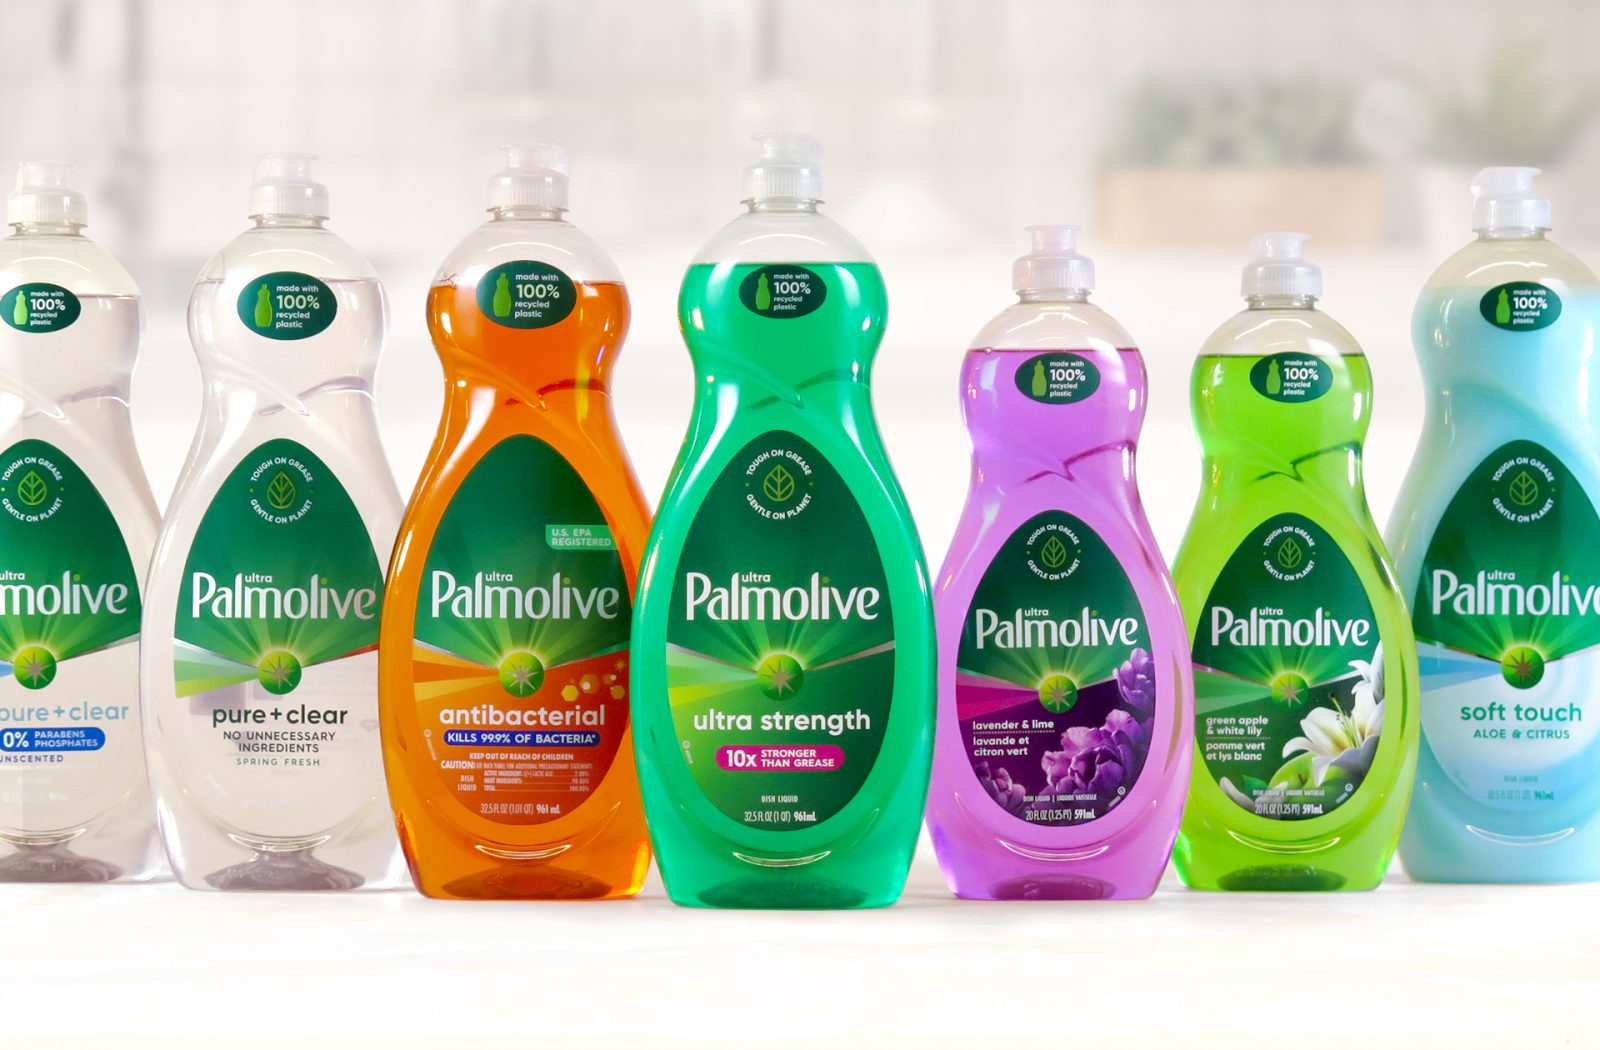 Photograph of a full product line of palmolive dish soap bottles, featuring print targets across seven distinct variants of sales samples created by a cpg packaging production agency.